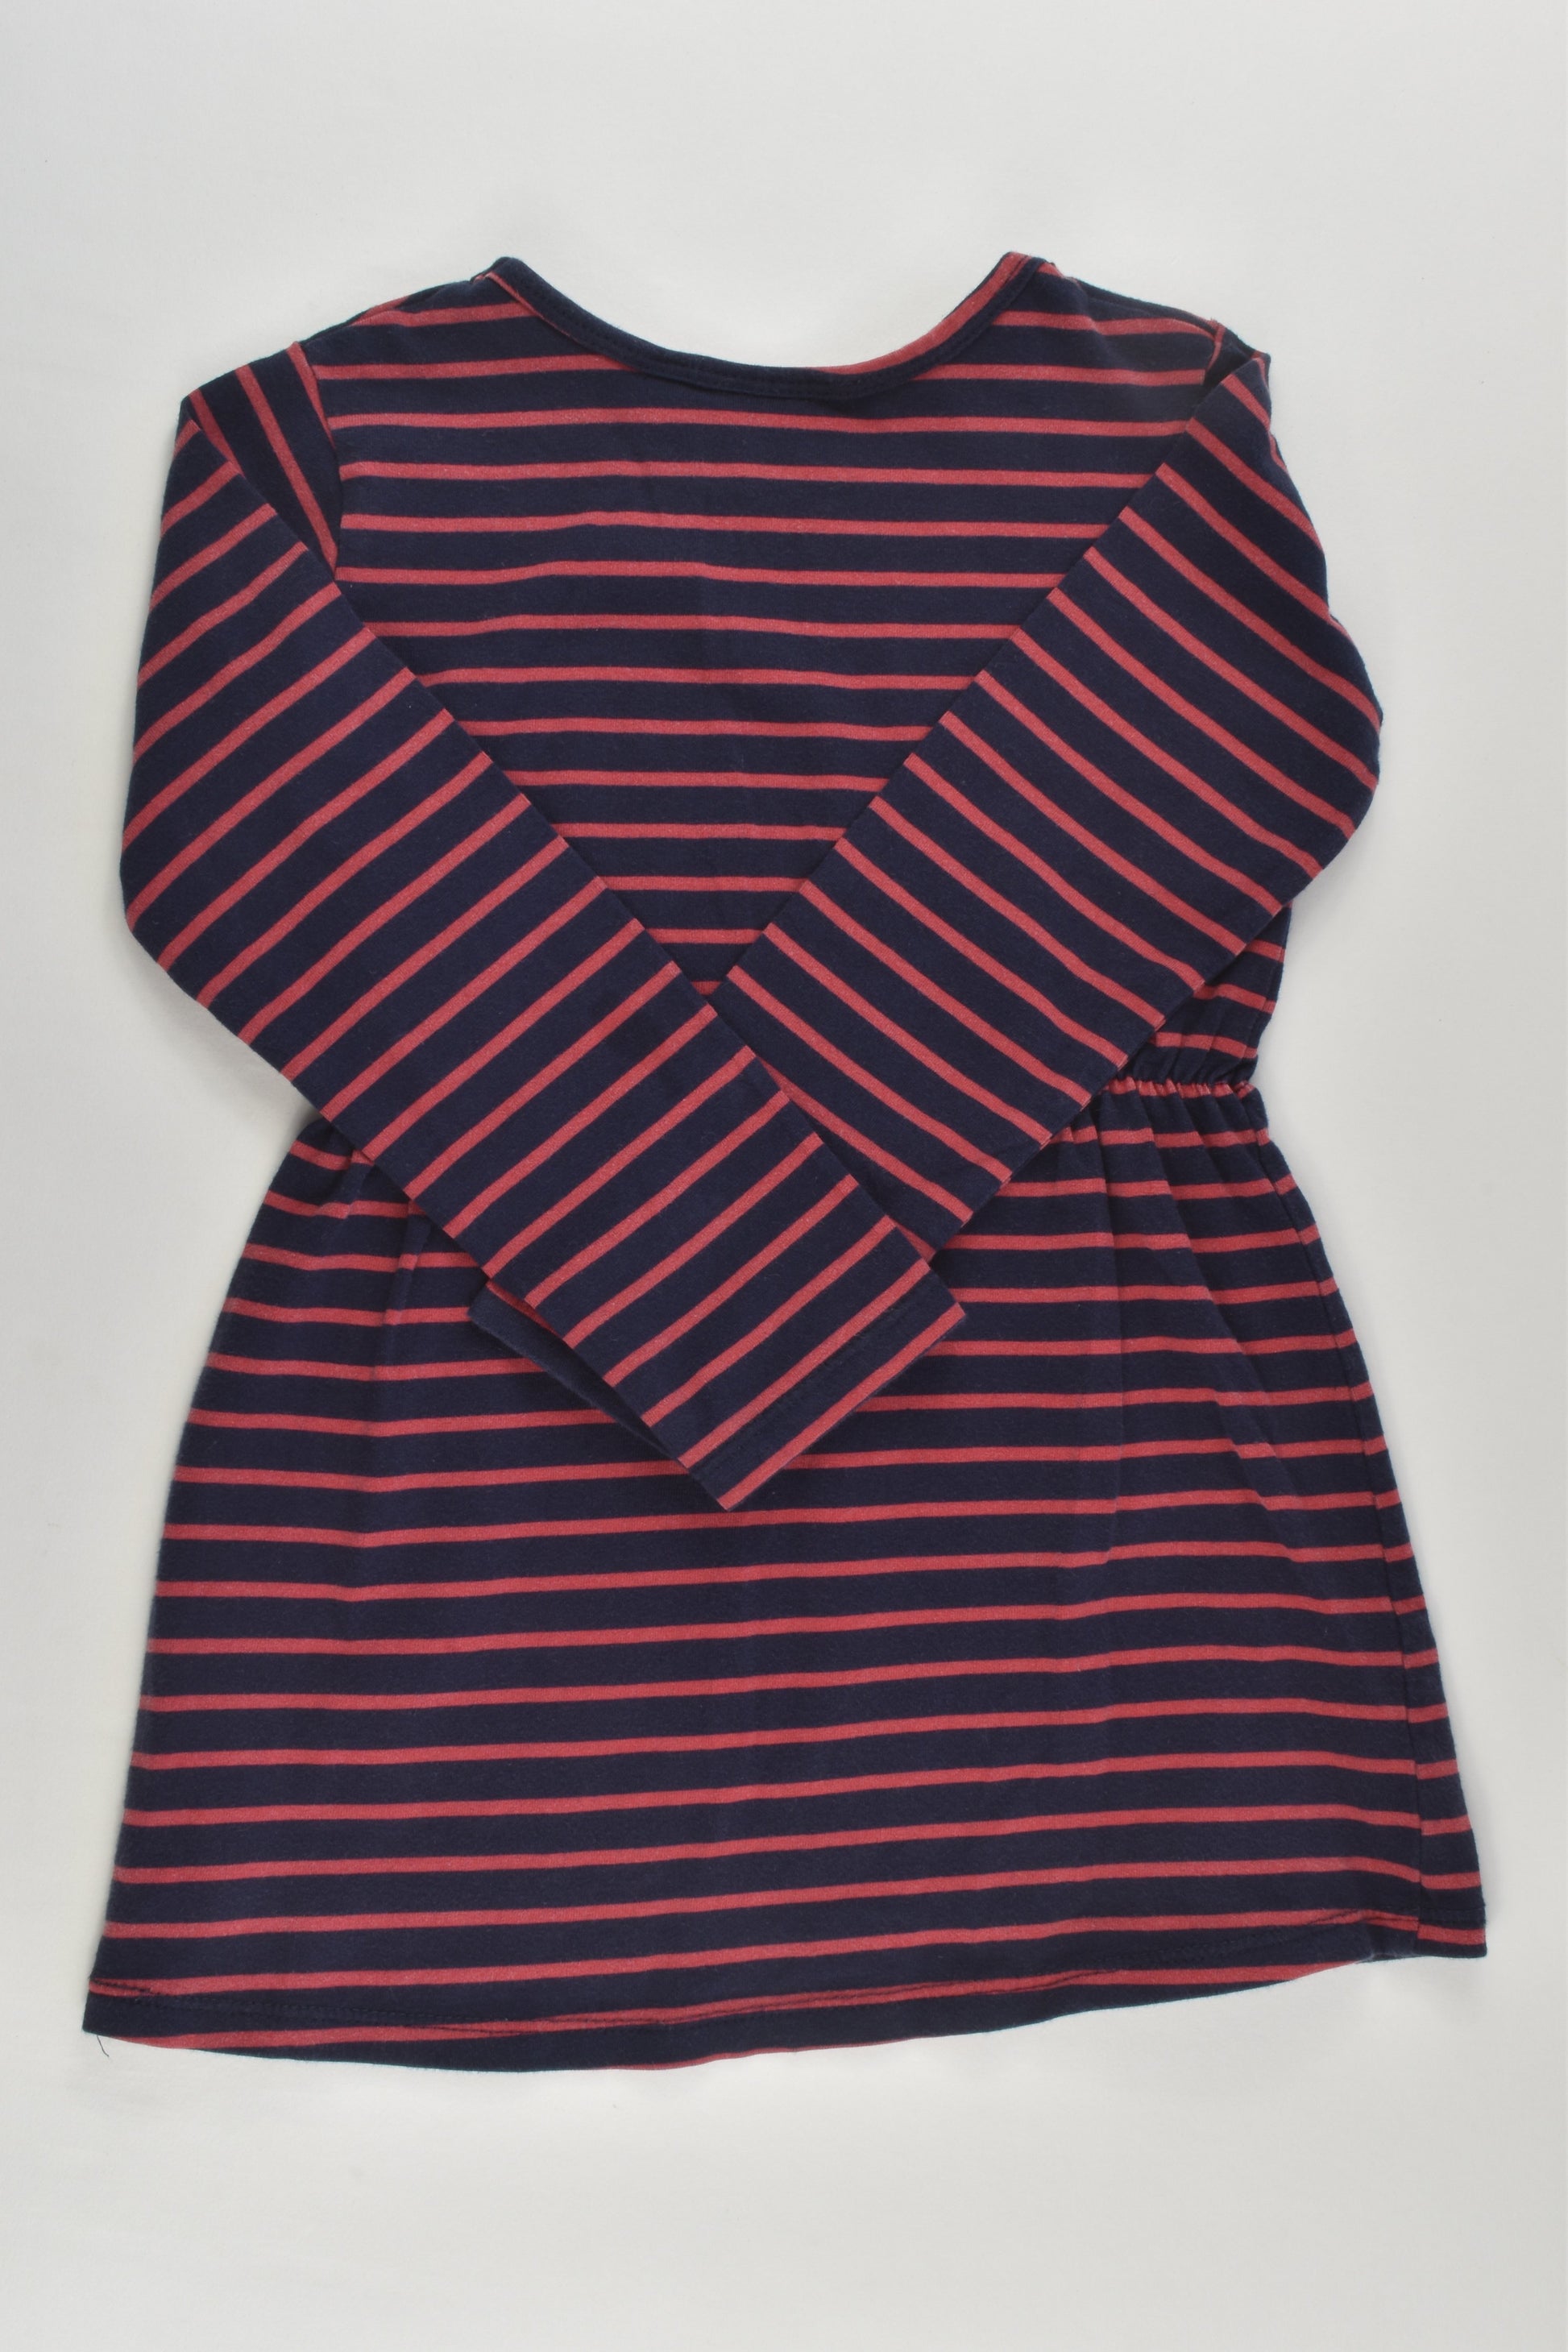 Sprout Size 2 Striped Dress